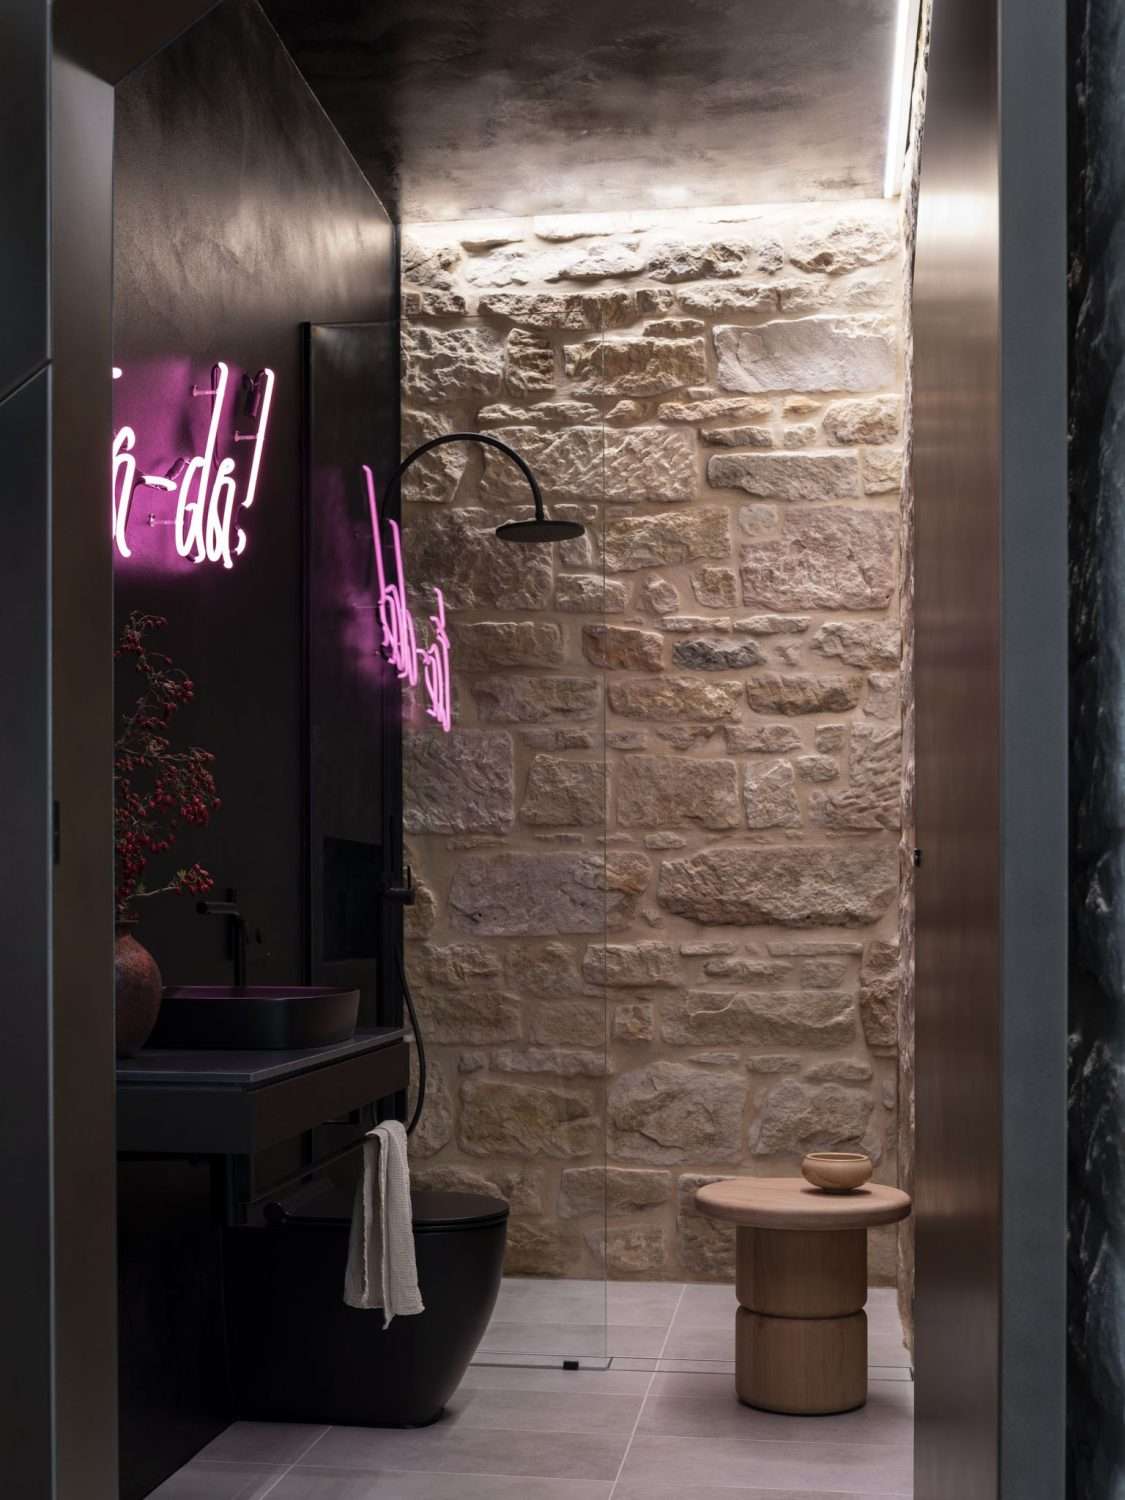 Maranatha House by BIJL Architecture showing internal view of the bathroom with exposed sandstone wall